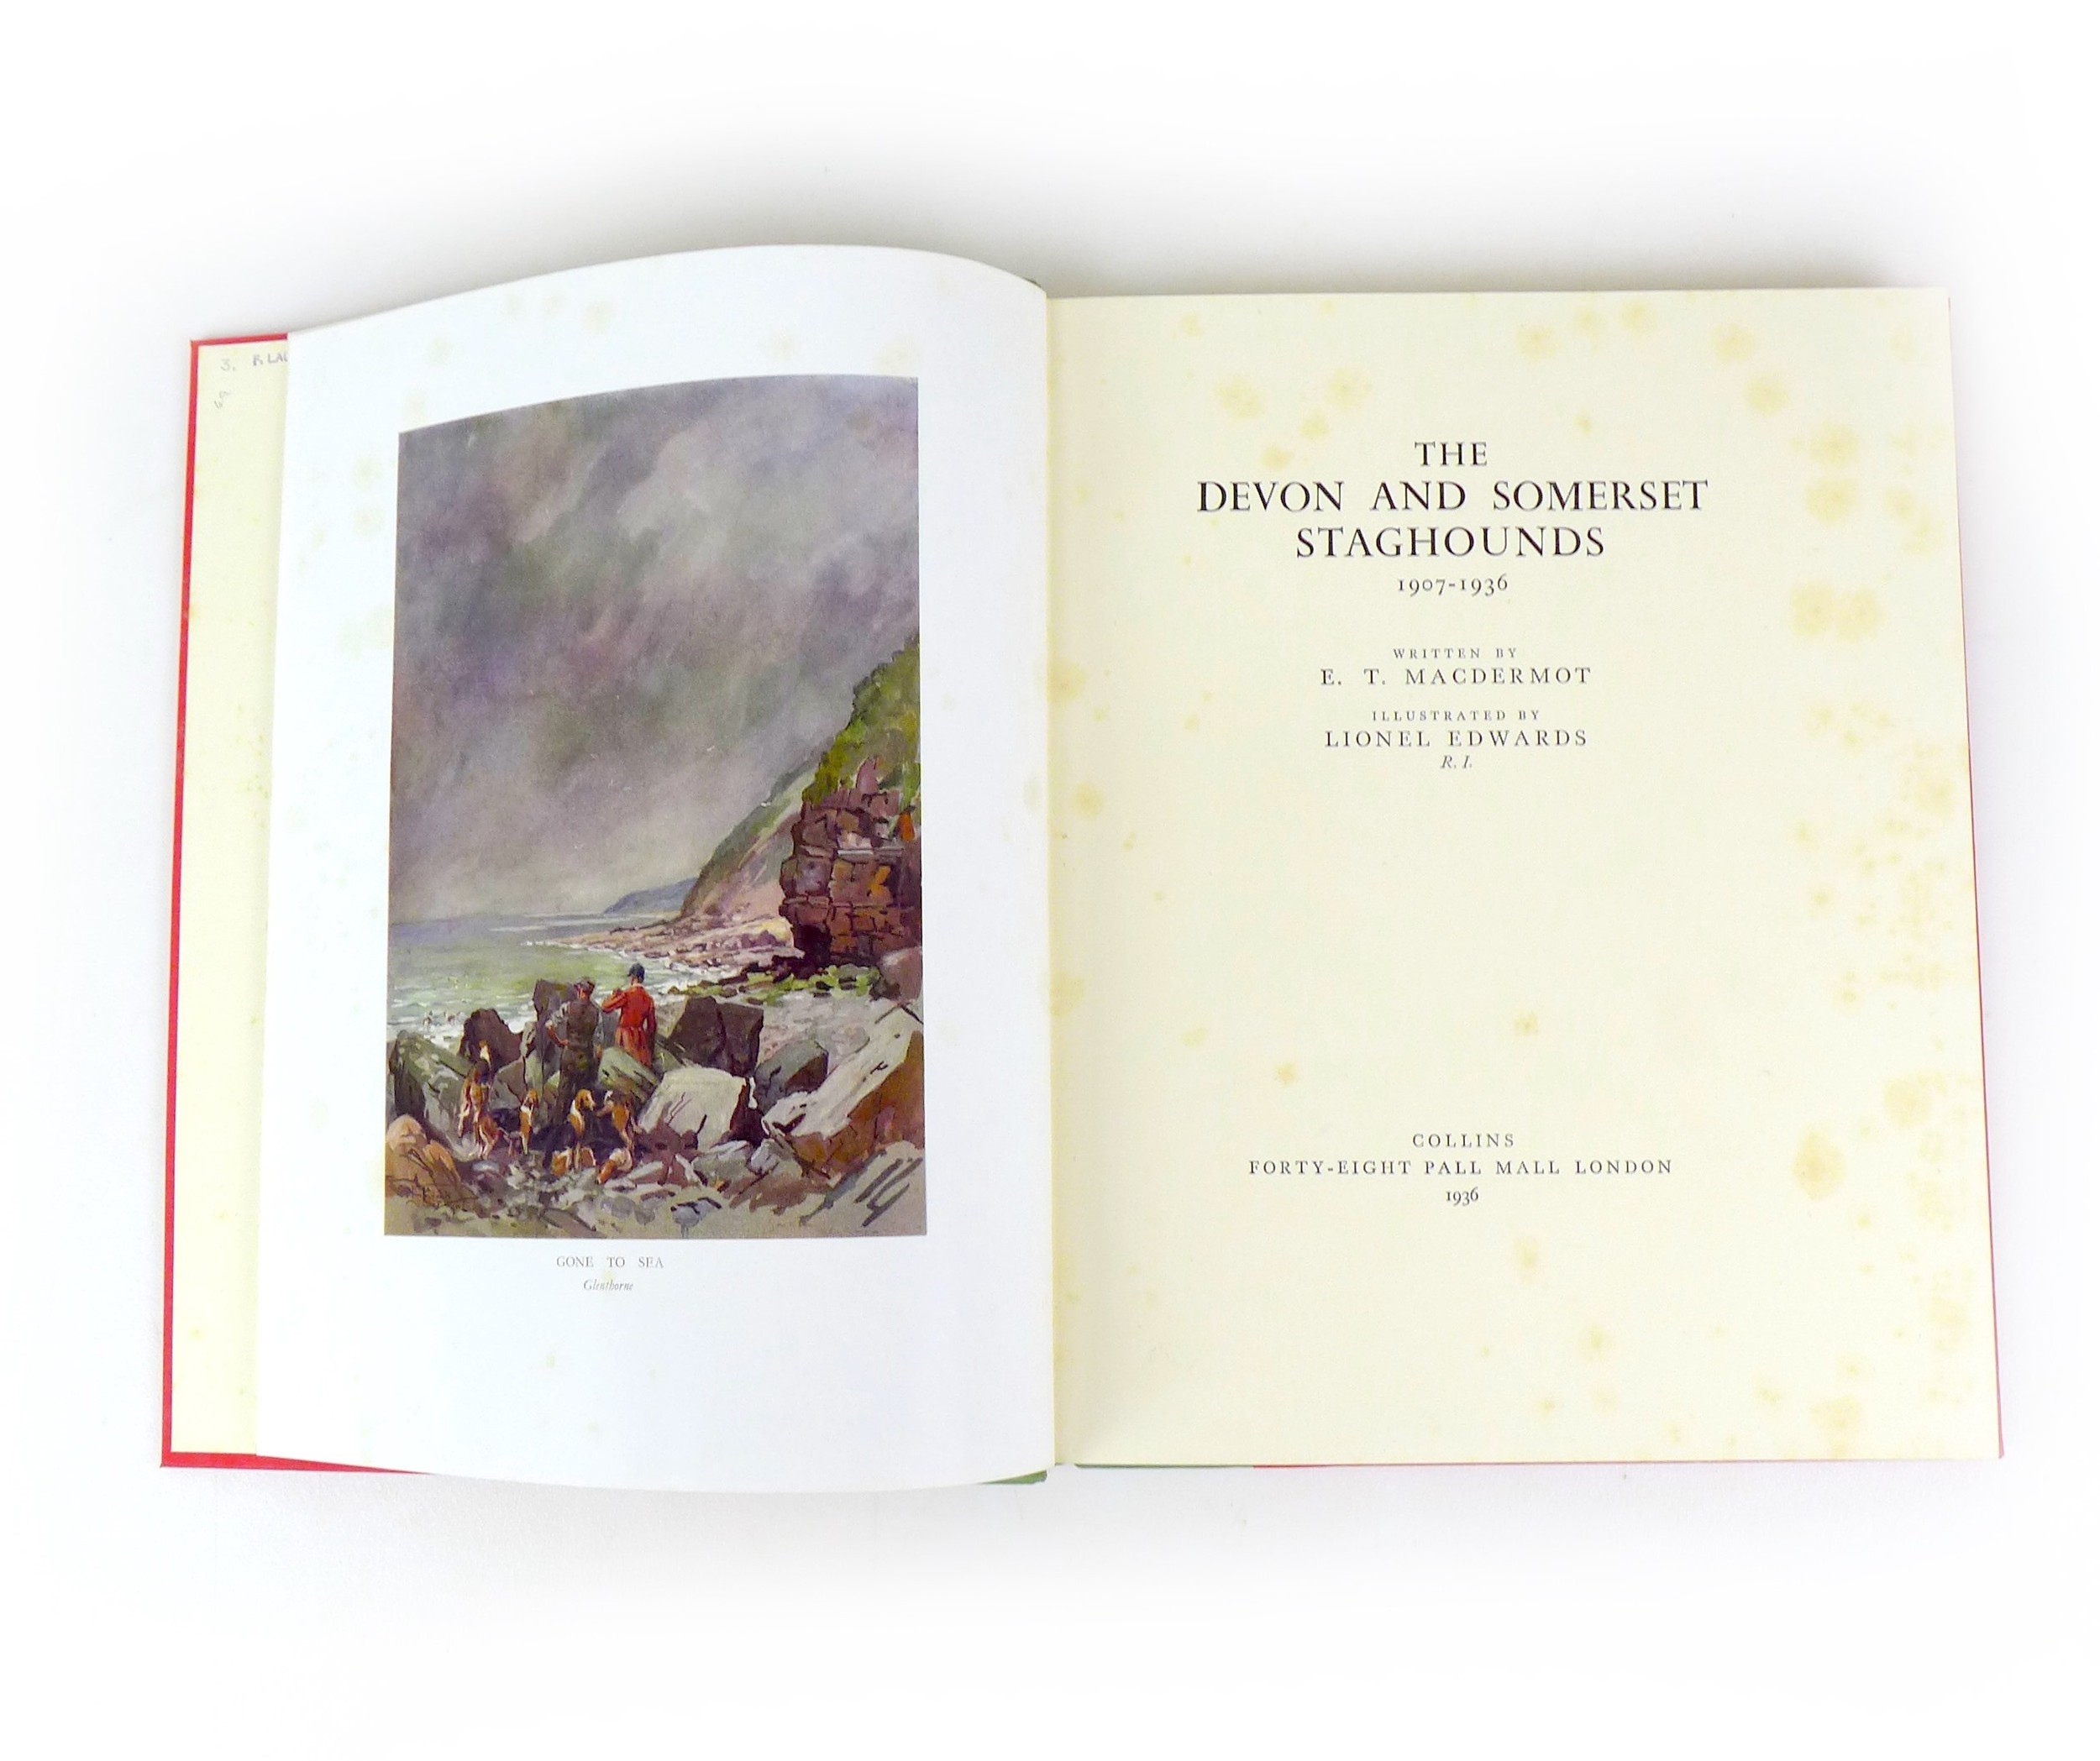 E. T. Macdermot with Illustrations by Lionel Edwards 'The Devon Somerset Staghounds 1907-1936', pub. - Image 3 of 3